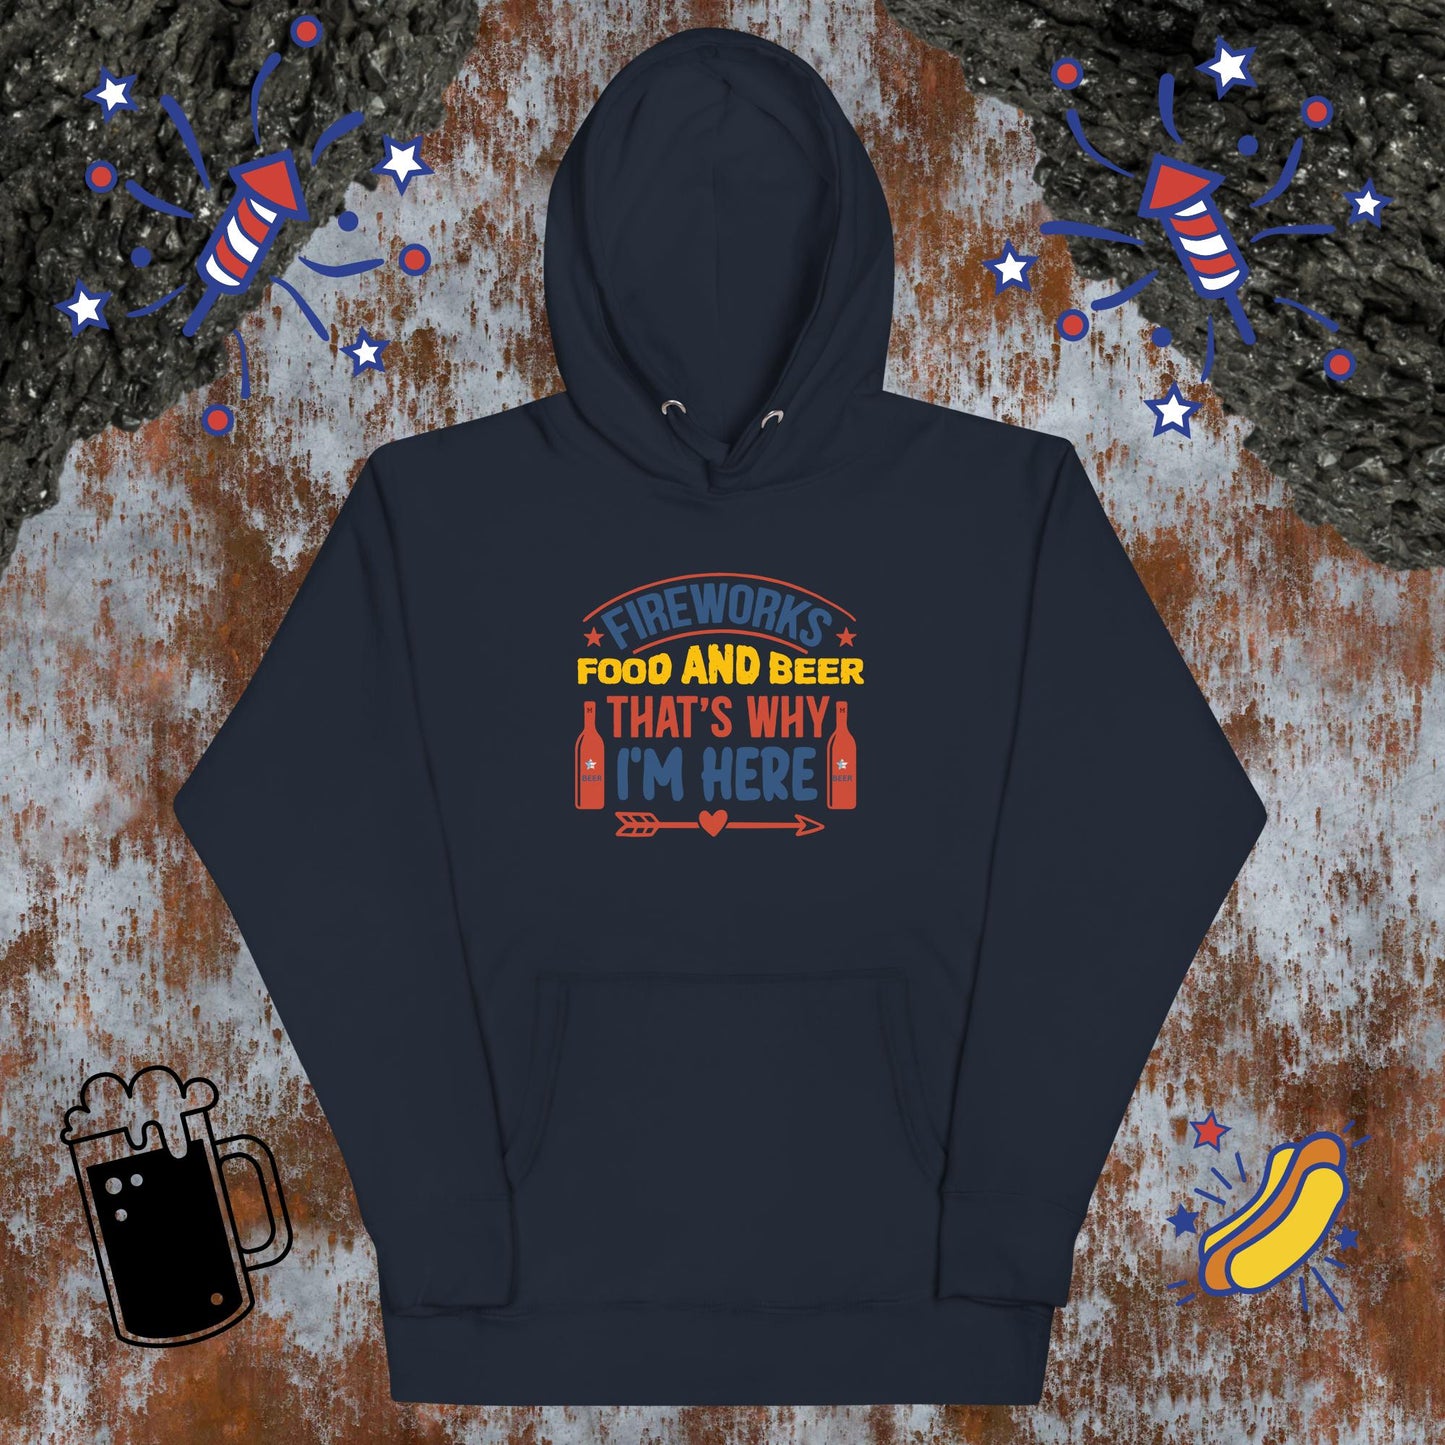 Fireworks, Food and Beer - That's Why I'm Here Unisex Hoodie by MII Designs